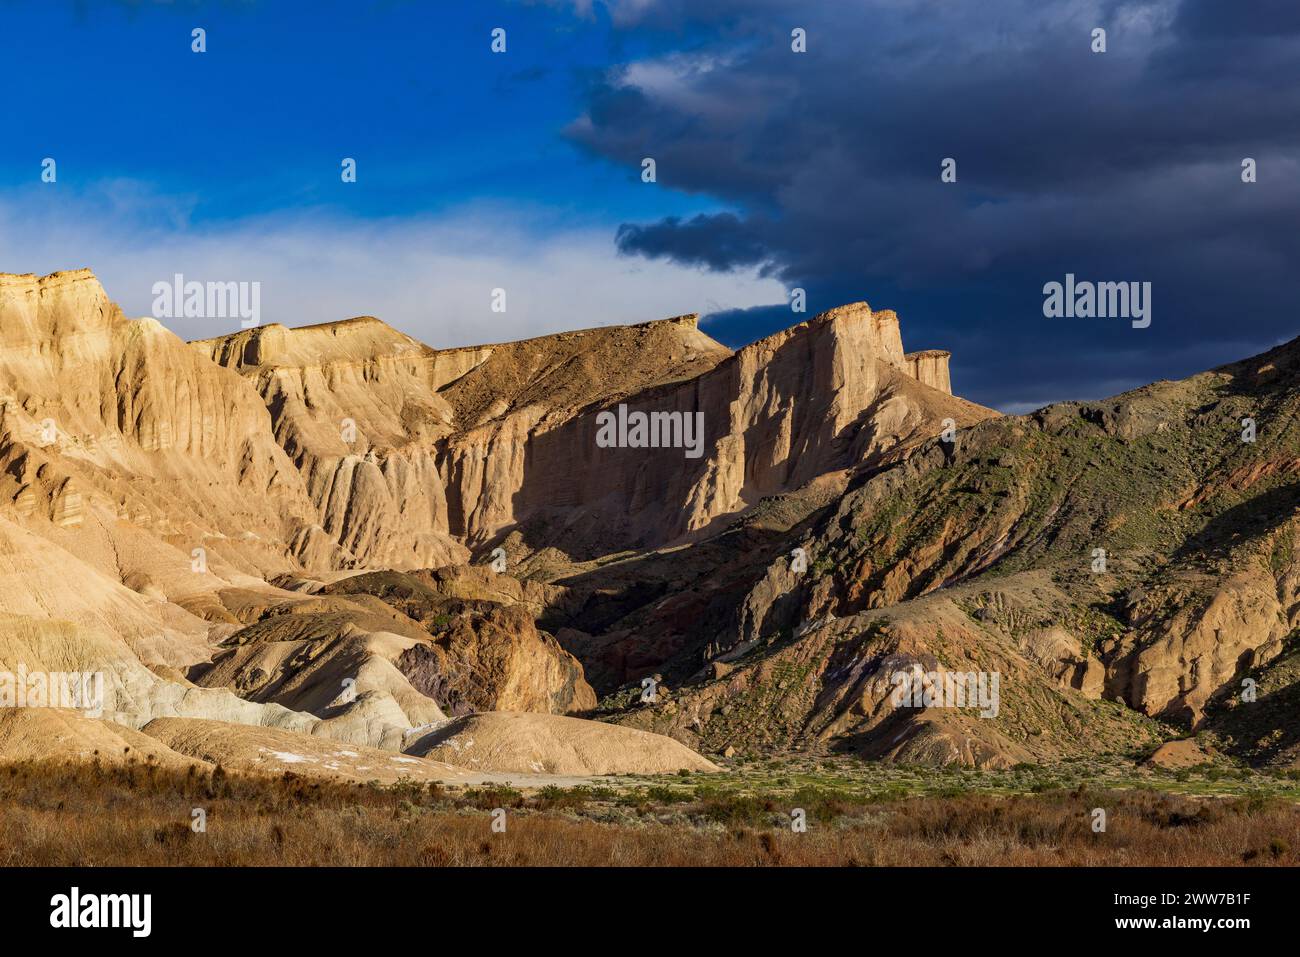 This is a view of  spectacular sandstone cliffs as seen looking south along the China Ranch Trail near Tecopa, Inyo County, California, USA. Stock Photo